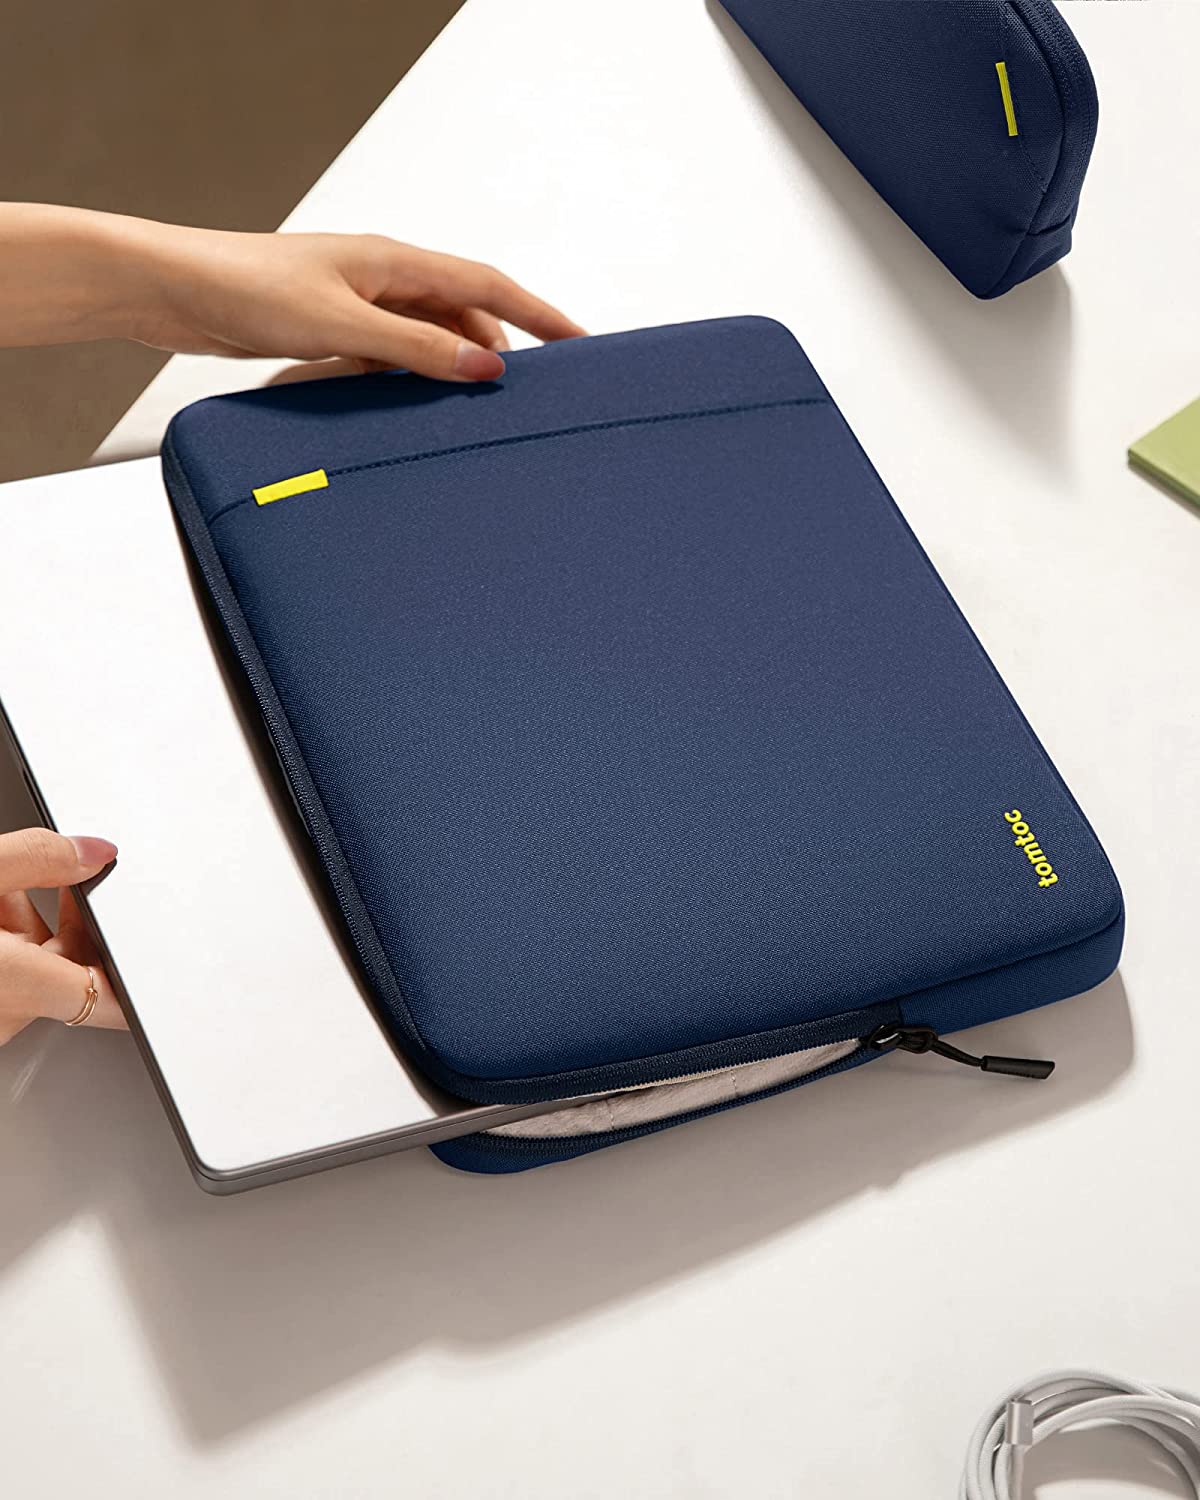 Tomtoc Defender-A13 Laptop Sleeve Kit For 16-inch - Navy Blue